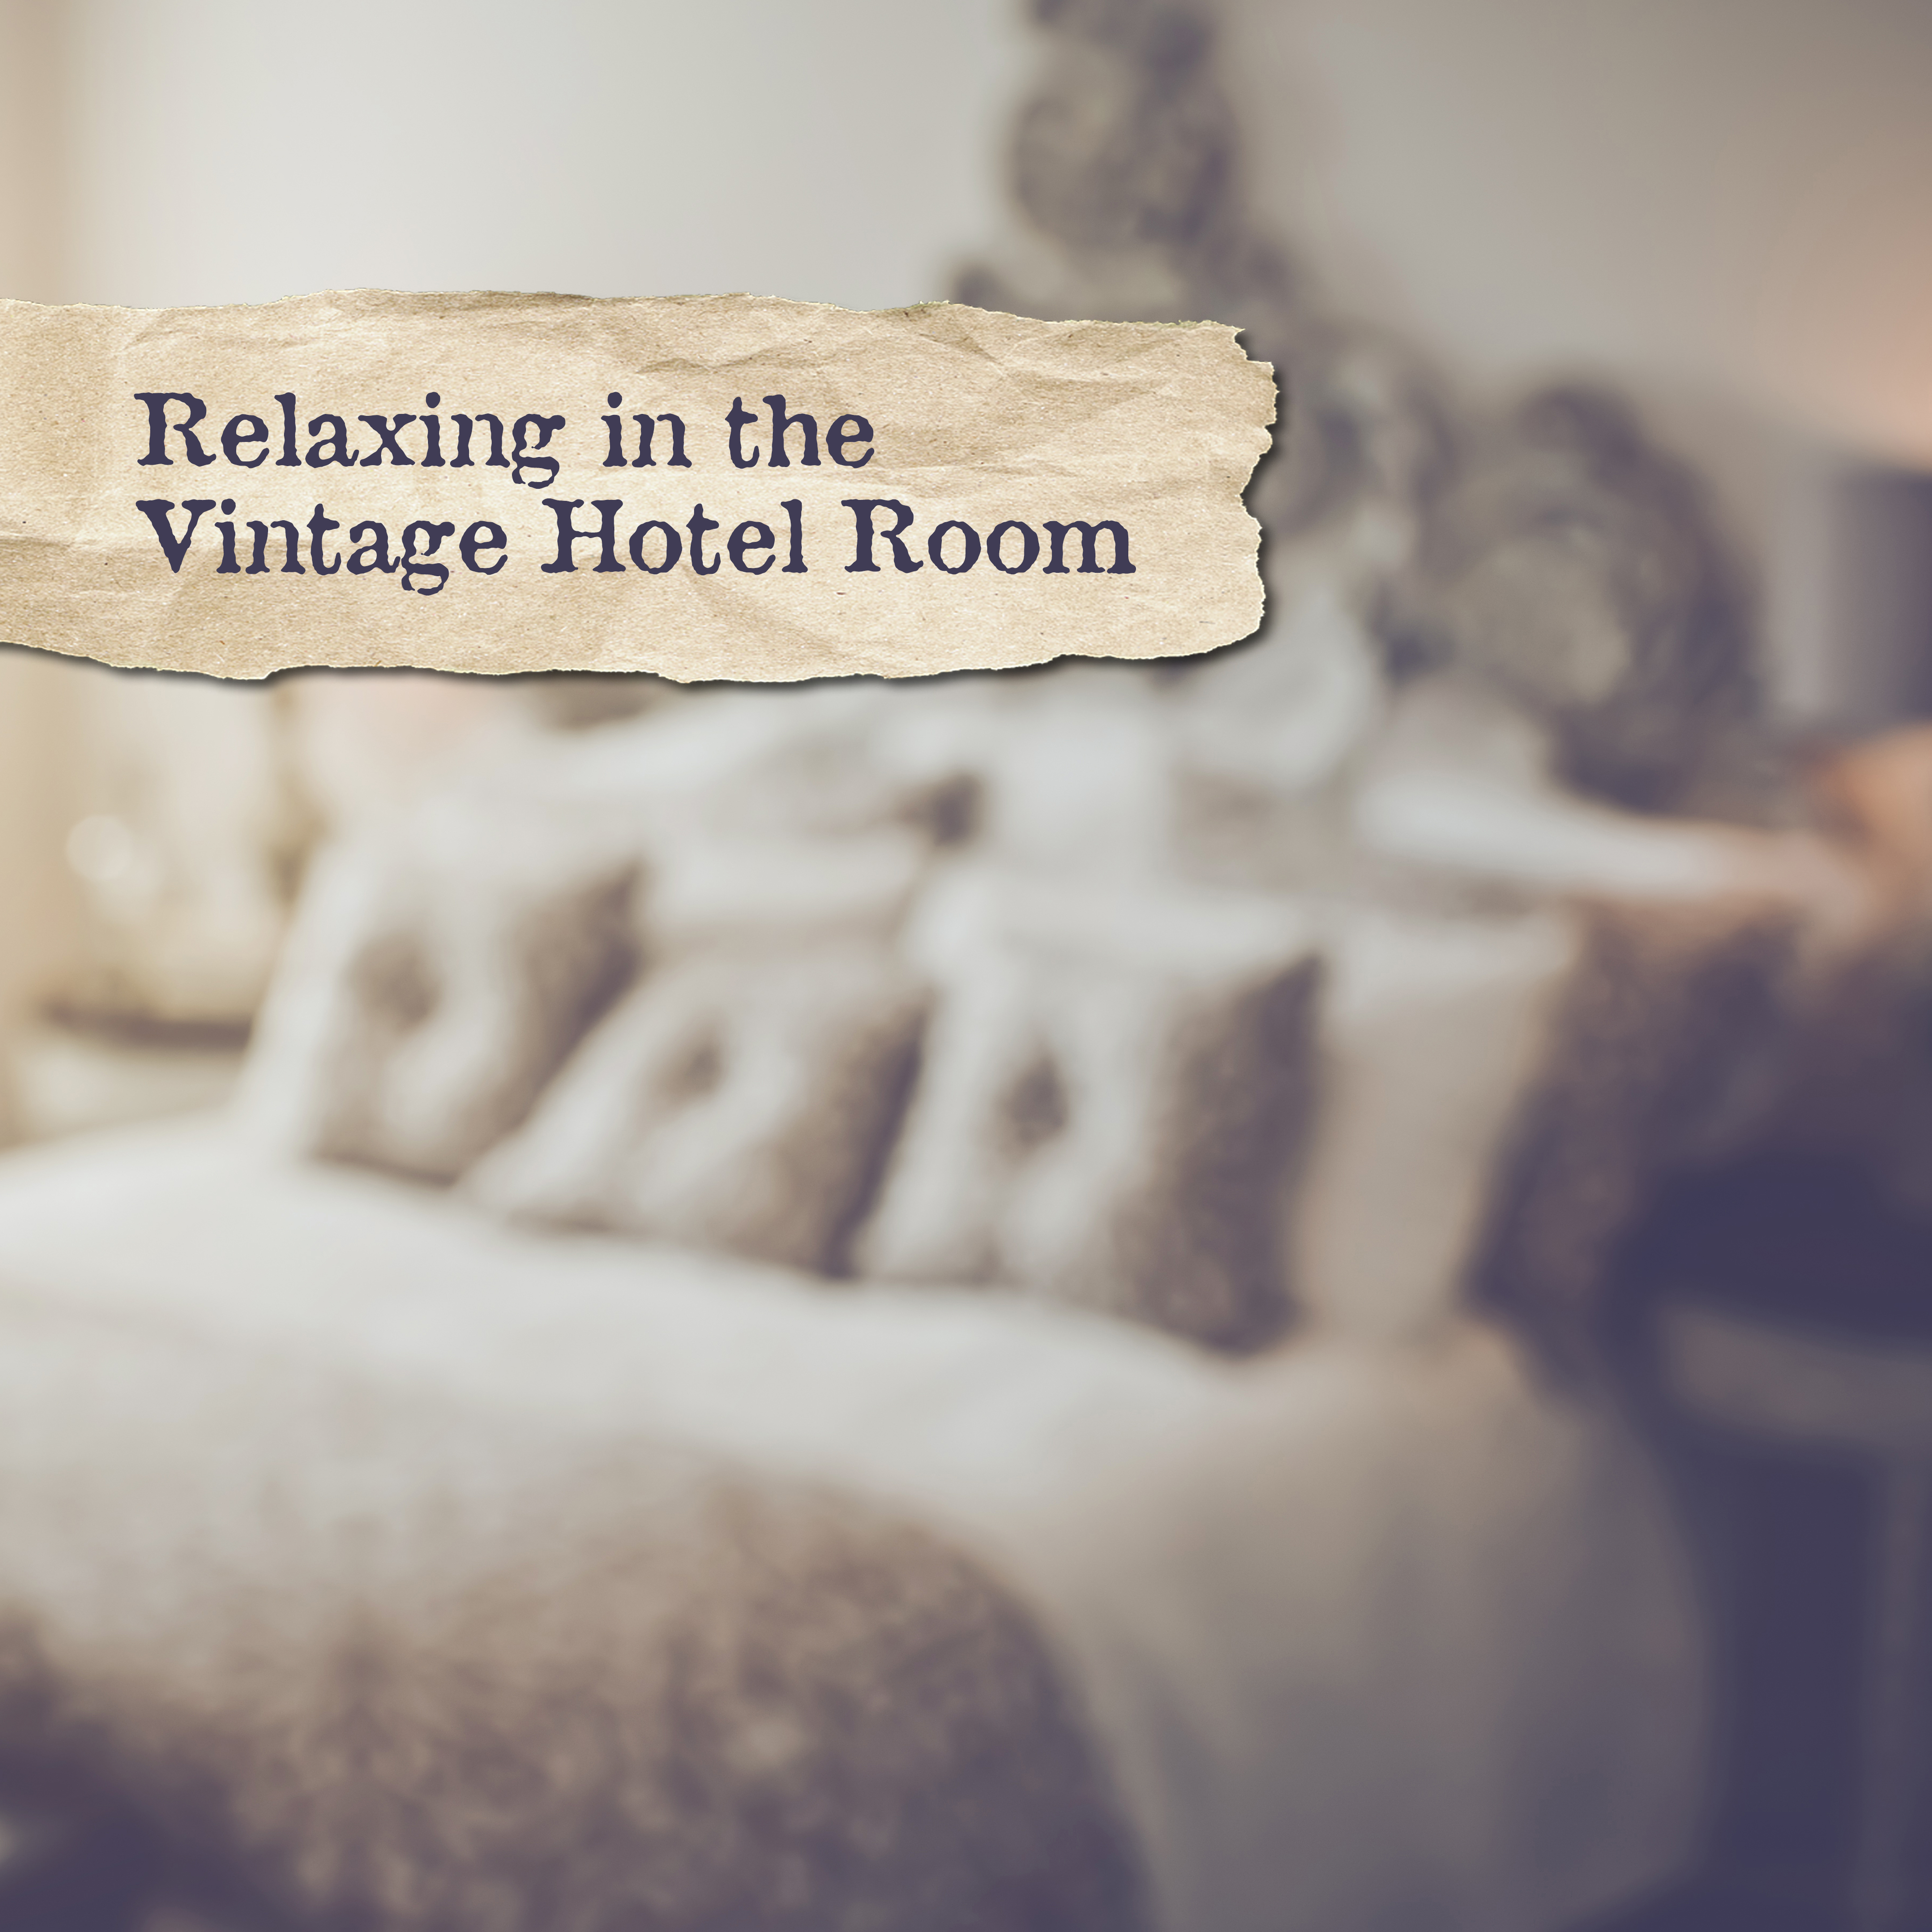 Relaxing in the Vintage Hotel Room: 15 Instrumental Jazz Songs for Rest & Relax